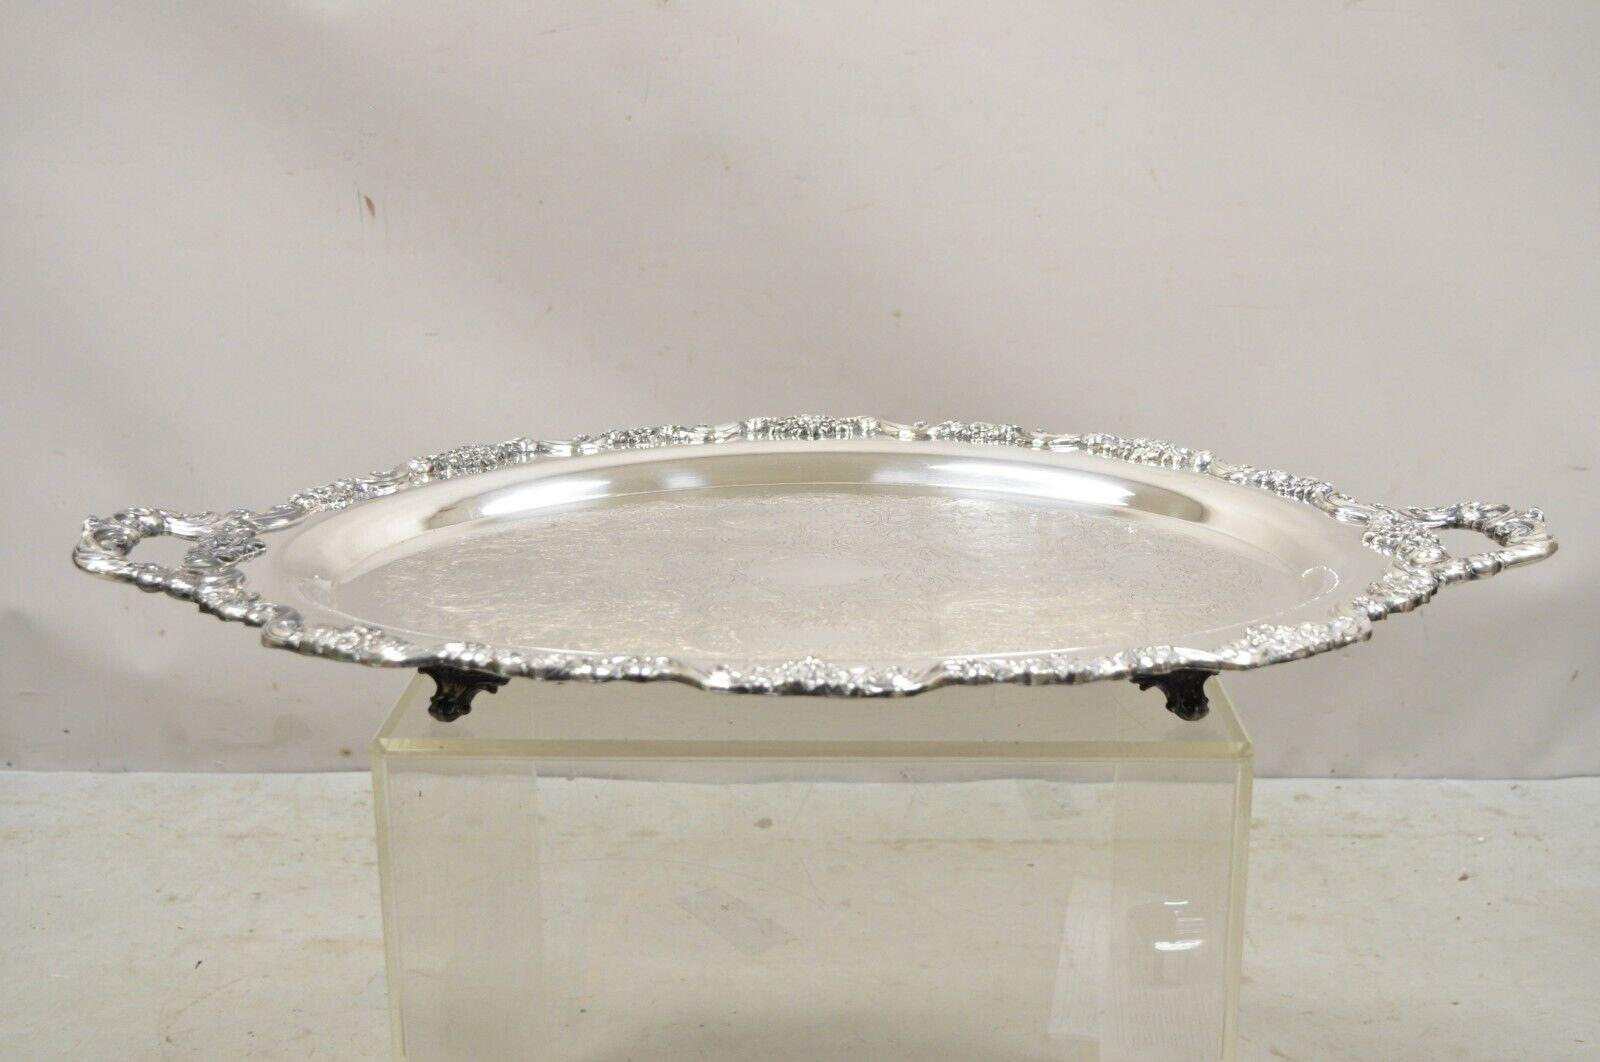 Vintage EPCA Poole Silver Co 400 Lancaster Rose Silver Plated Serving Platter Tray Item is raised on feet, ornate twin handles, etch decorated center, original hallmark, very nice vintage item, great style and form. 
Circa Mid 20th Century.